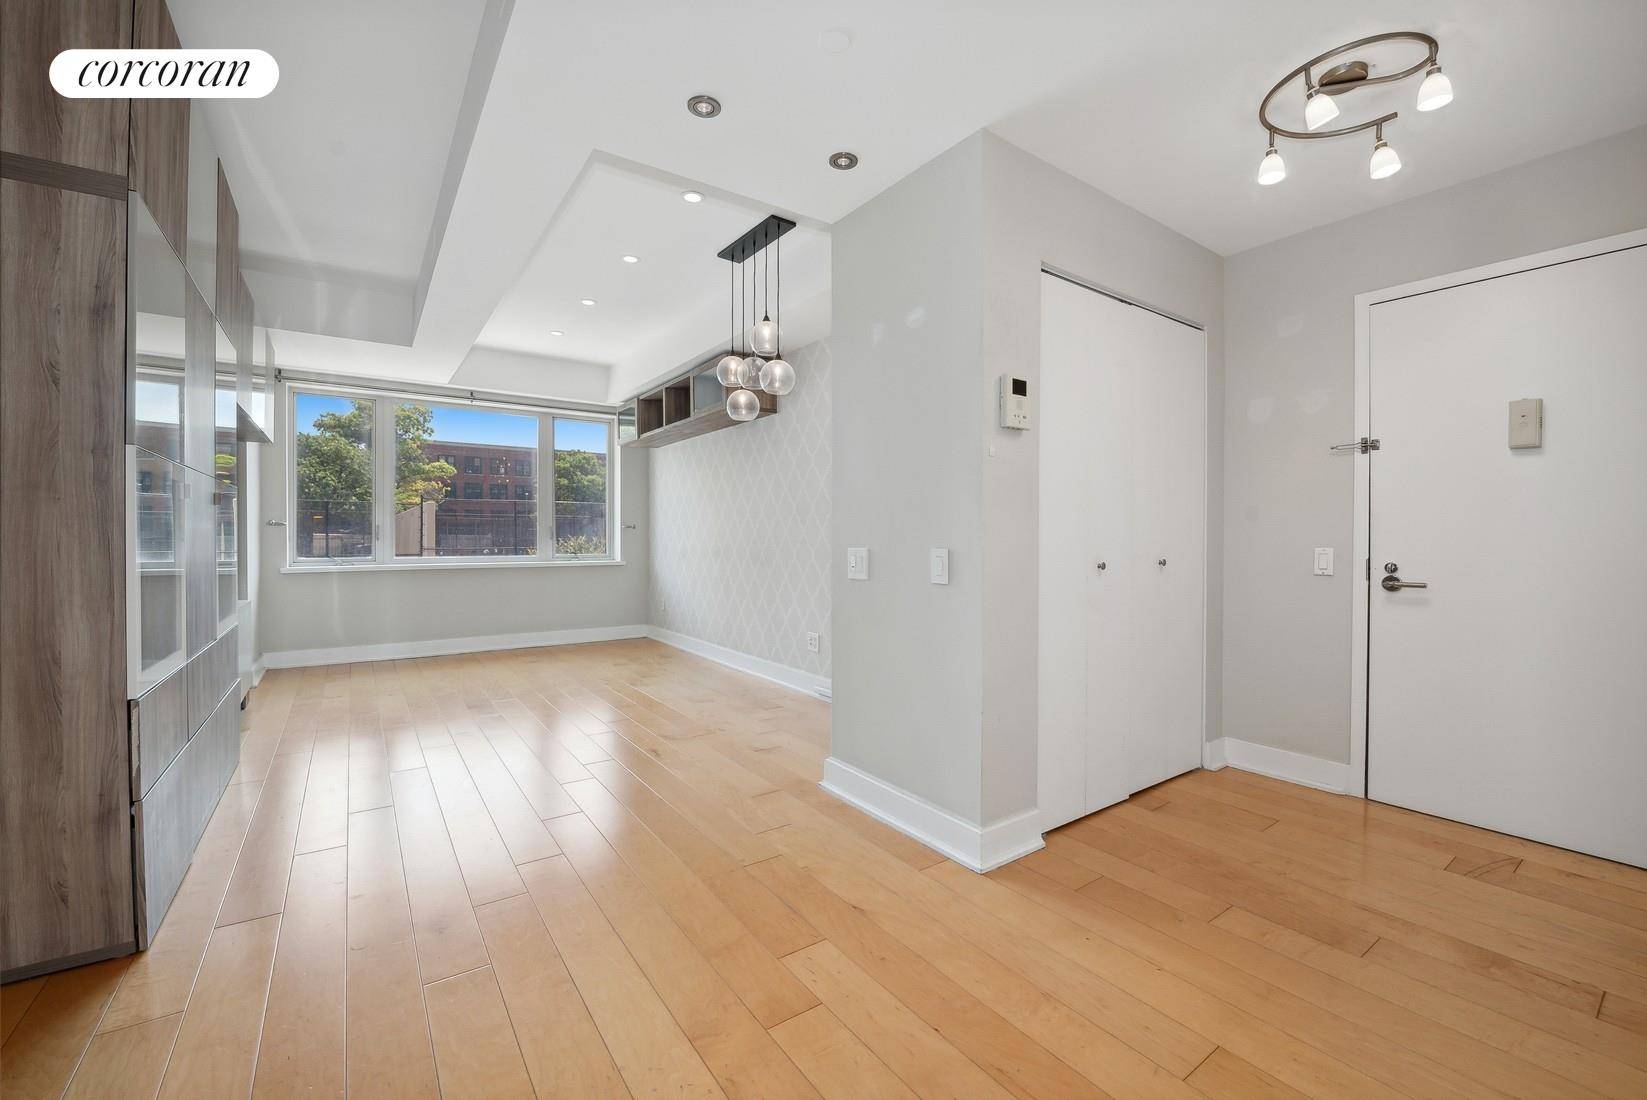 343 4th Avenue, 2G A bright amp ; spacious corner apartment in a luxury full service building in the heart of Park Slope overlooking leafy brownstone Brooklyn and The Old ...